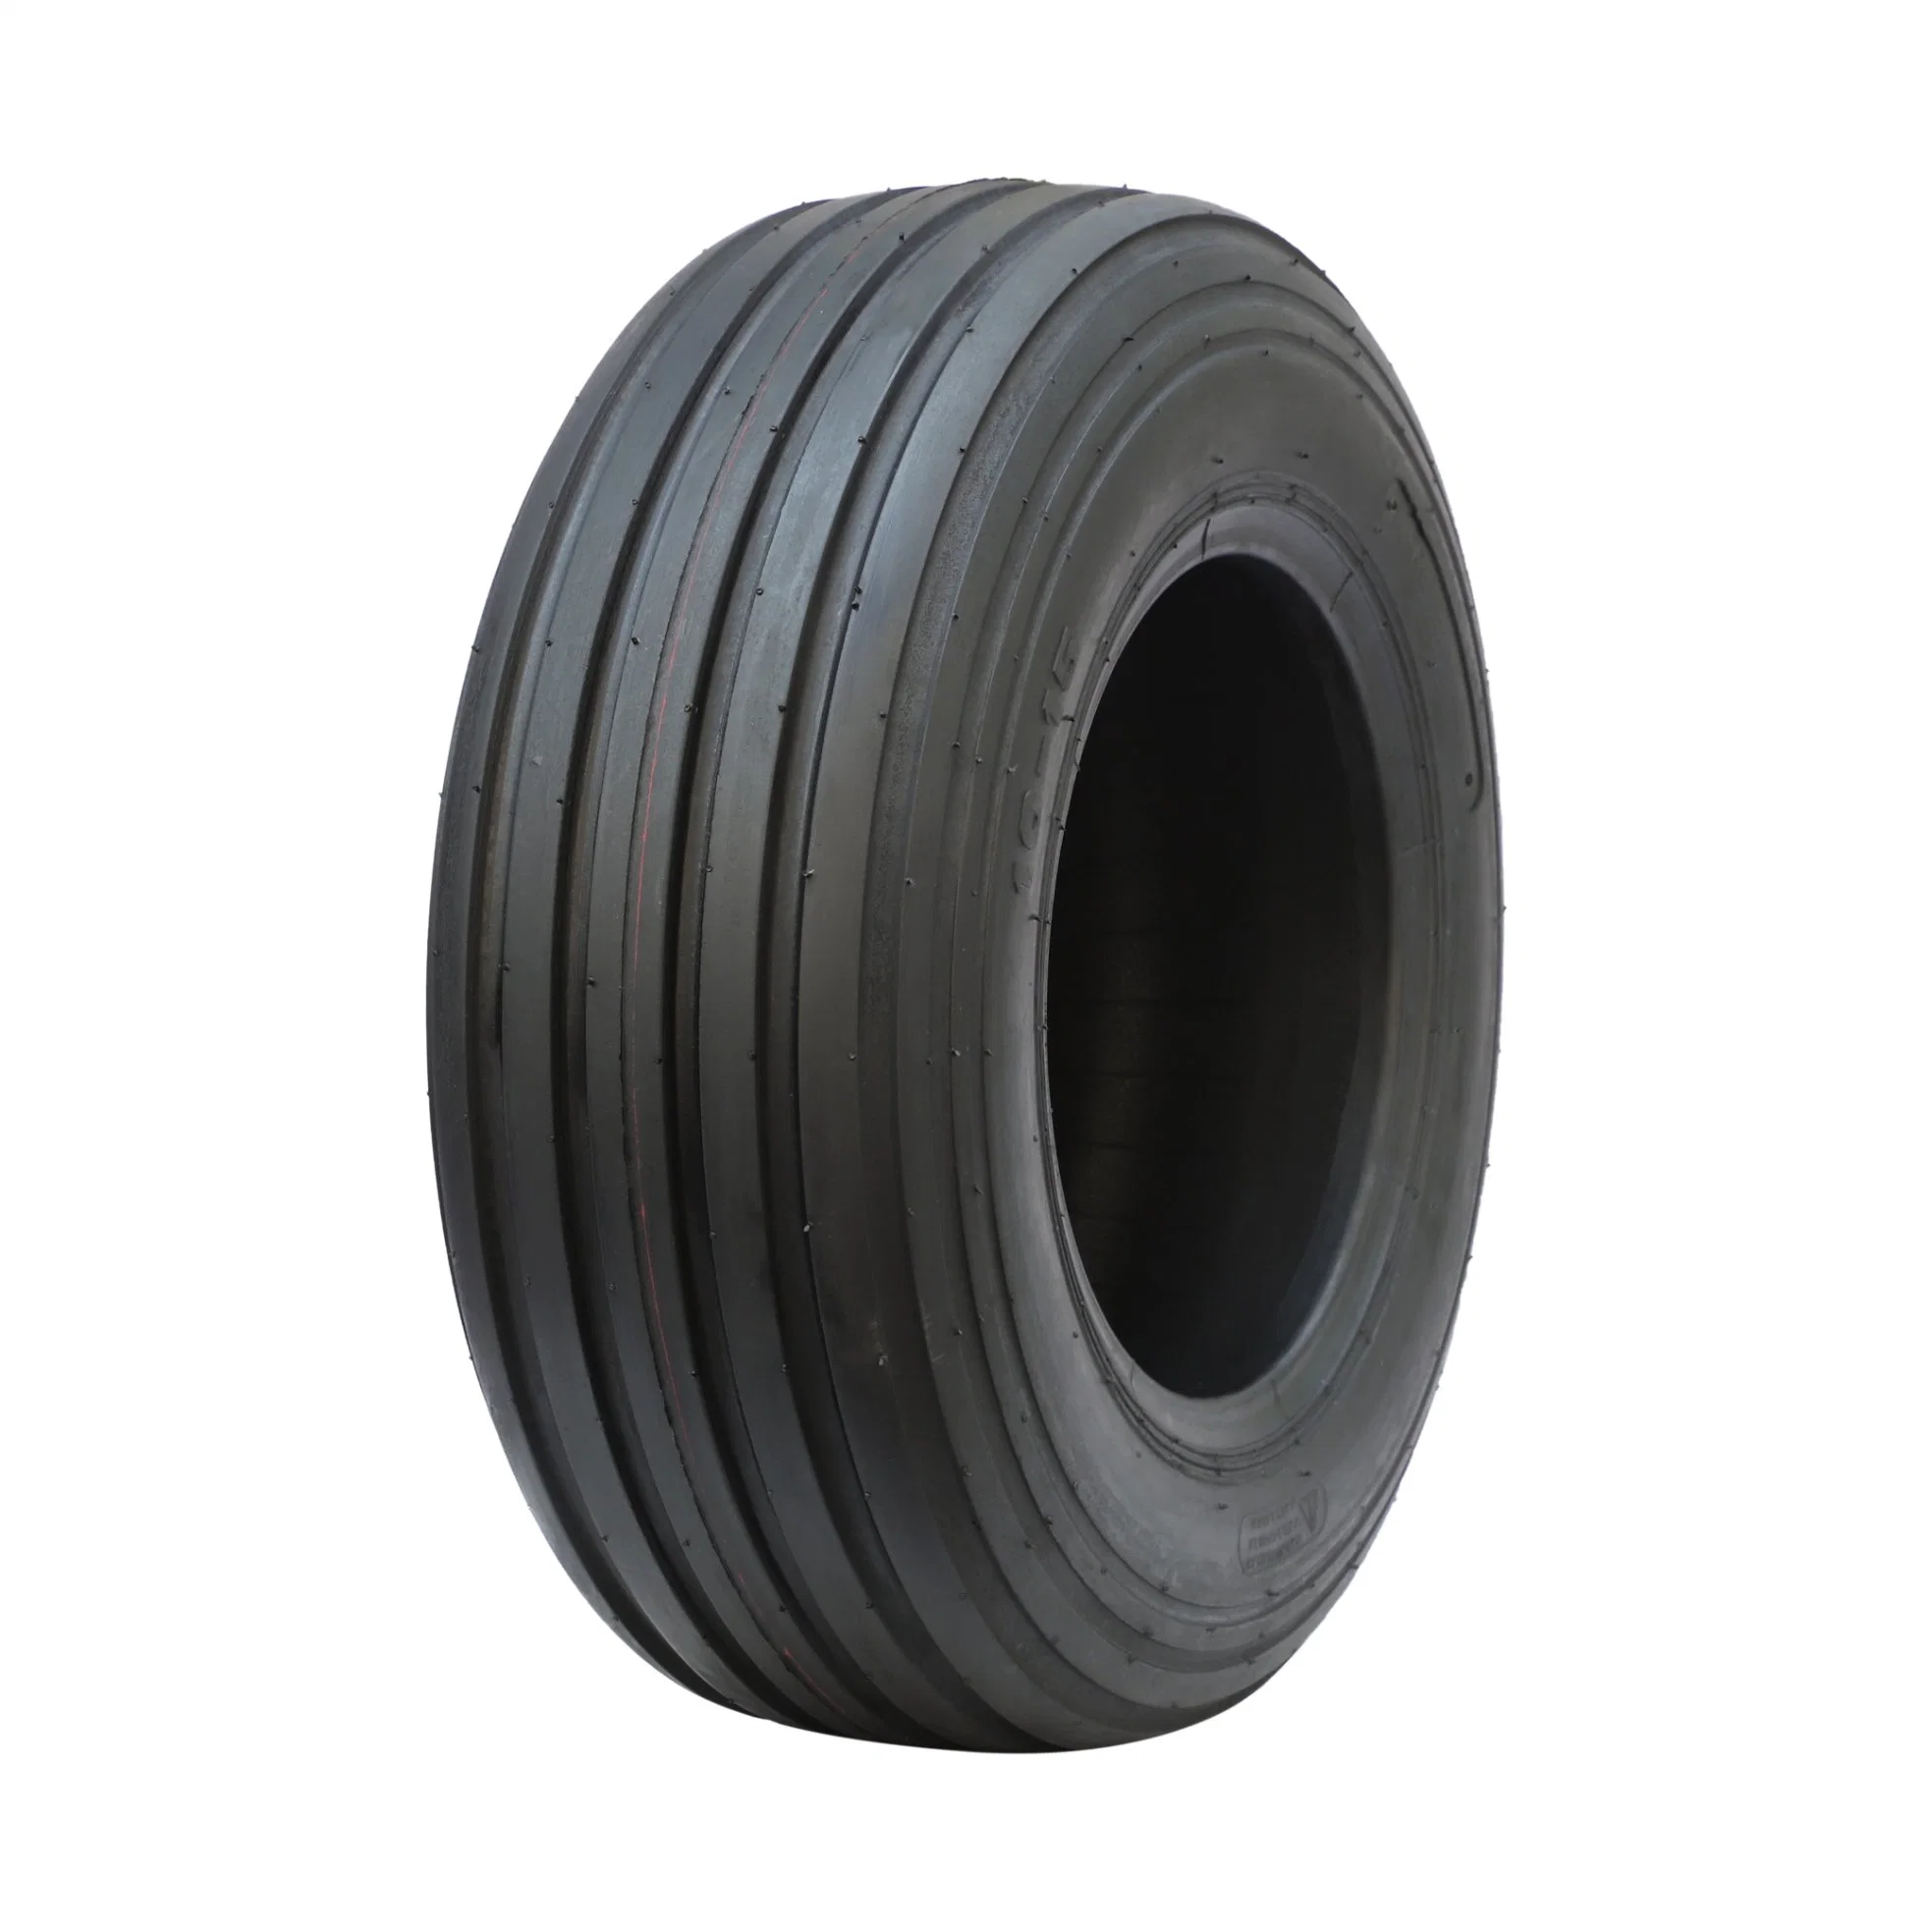 10-15-12, 205/70-15, 760L-15-12, Agricultural Tyre, Tractor Tyre, Implement Tyre, Baler Tyre, Imp-01 Tyre, Farm Trailer Tyre